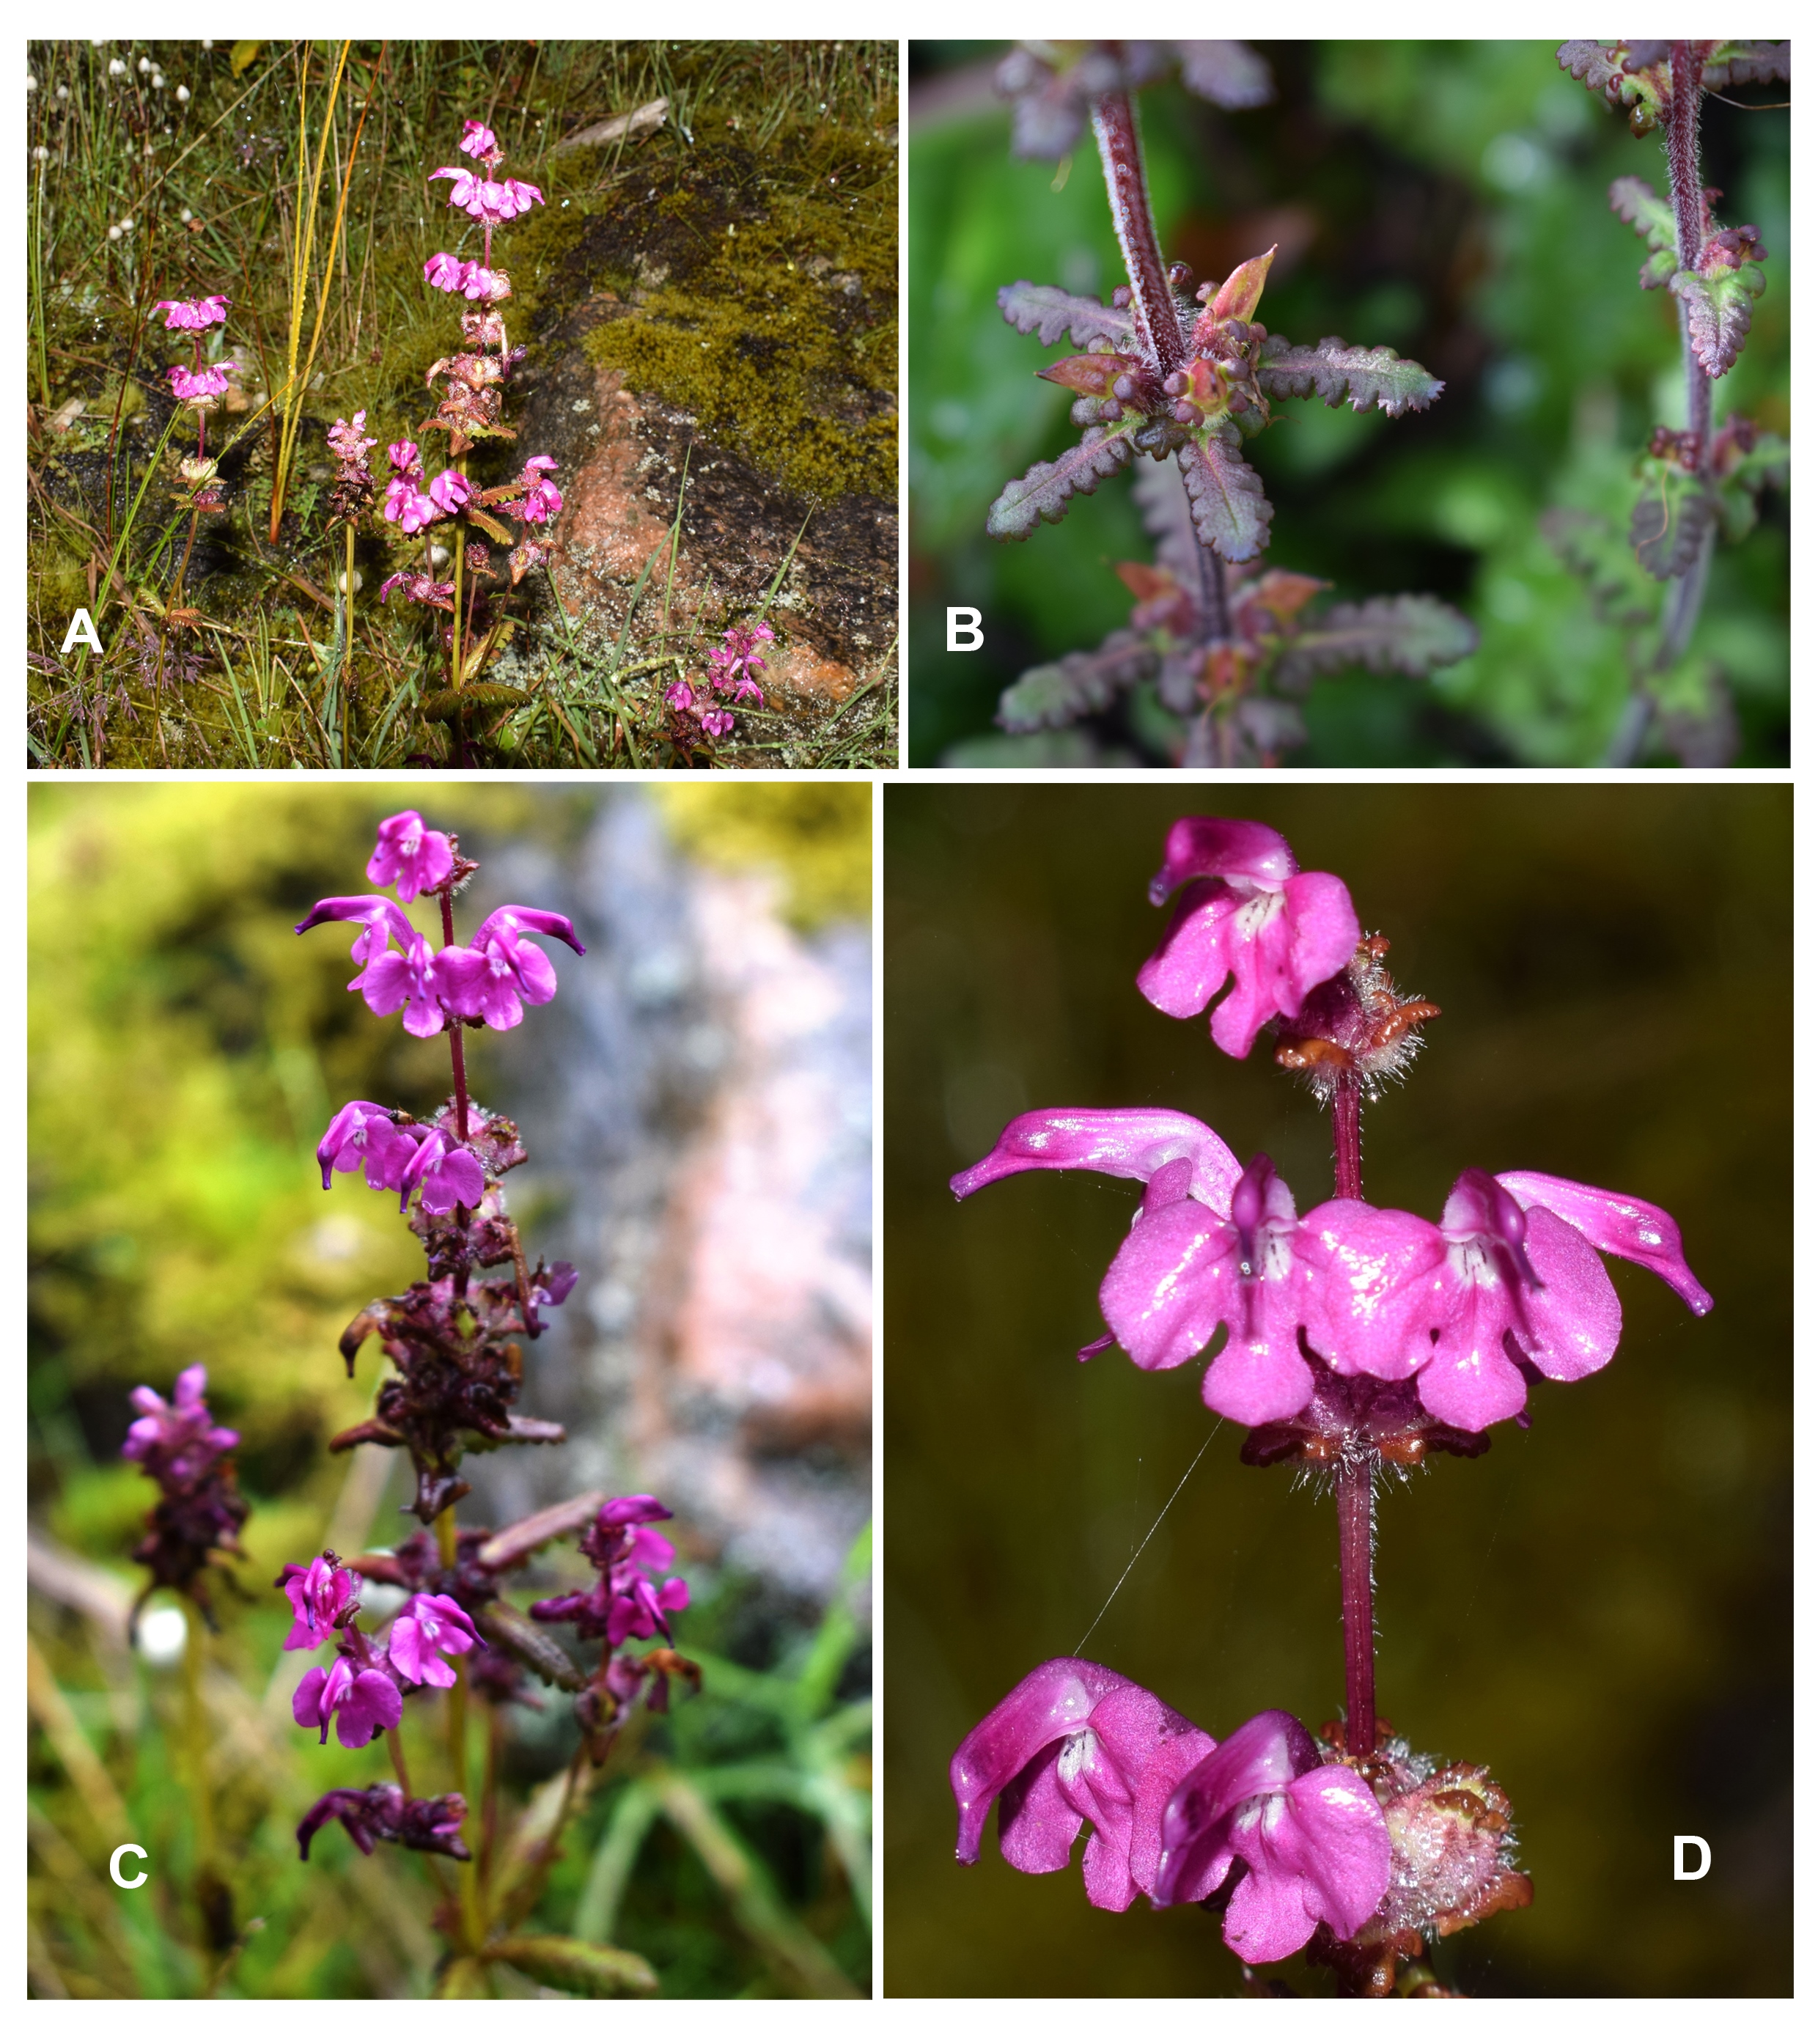 /wp-content/uploads/2020/10/FIGURE%201.%20Pedicularis%20denudata.%20A.%20Habitat_%20B.%20Close-up%20of%20leaves%20and%20capsule_%20C.%20Inflorescence_%20D.%20Close-up%20of%20flowers..jpg